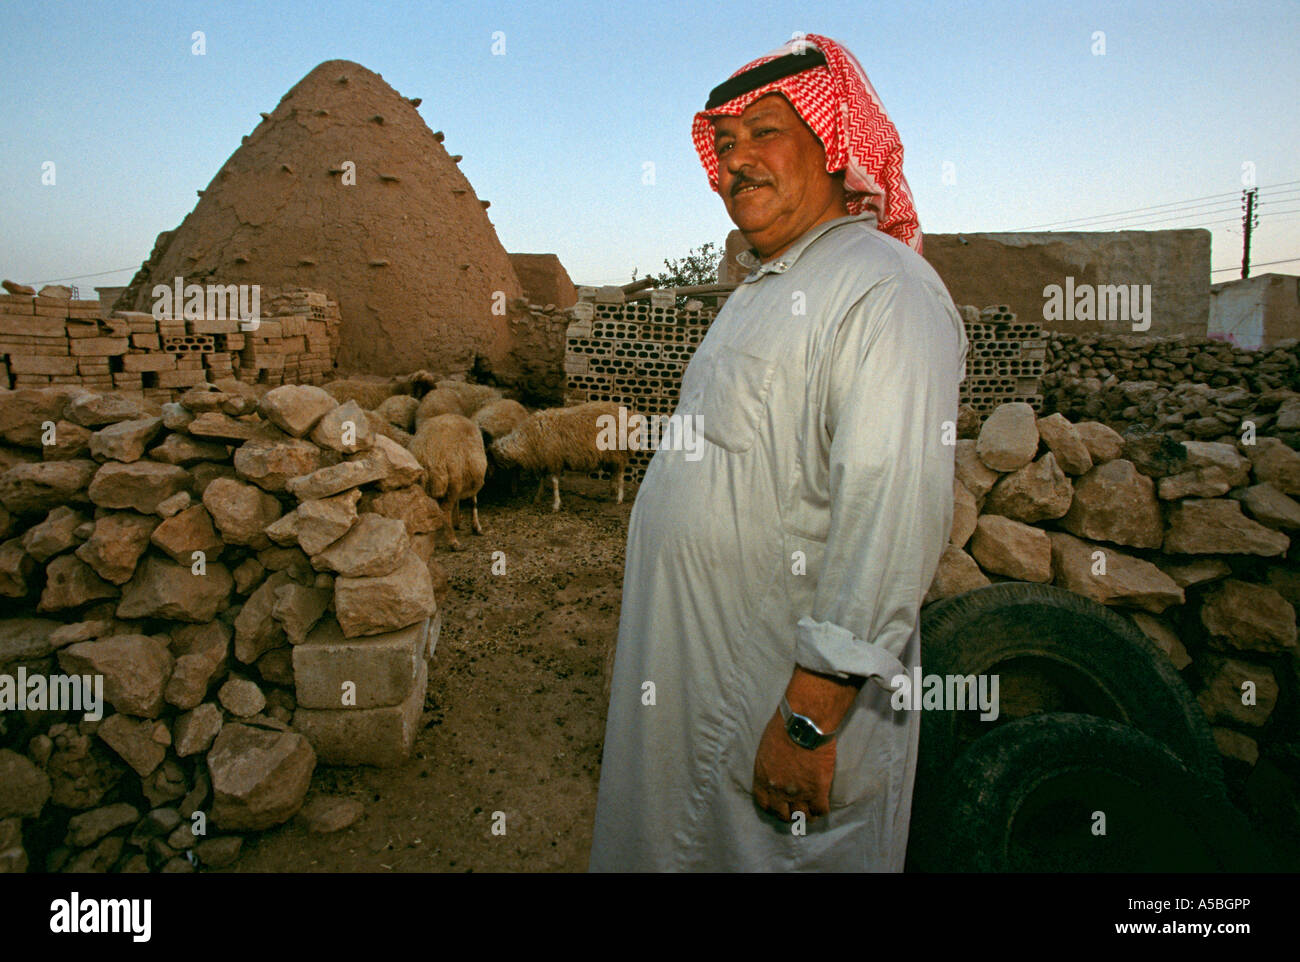 A man standing in front of beehive houses in Aleppo Syria Stock Photo